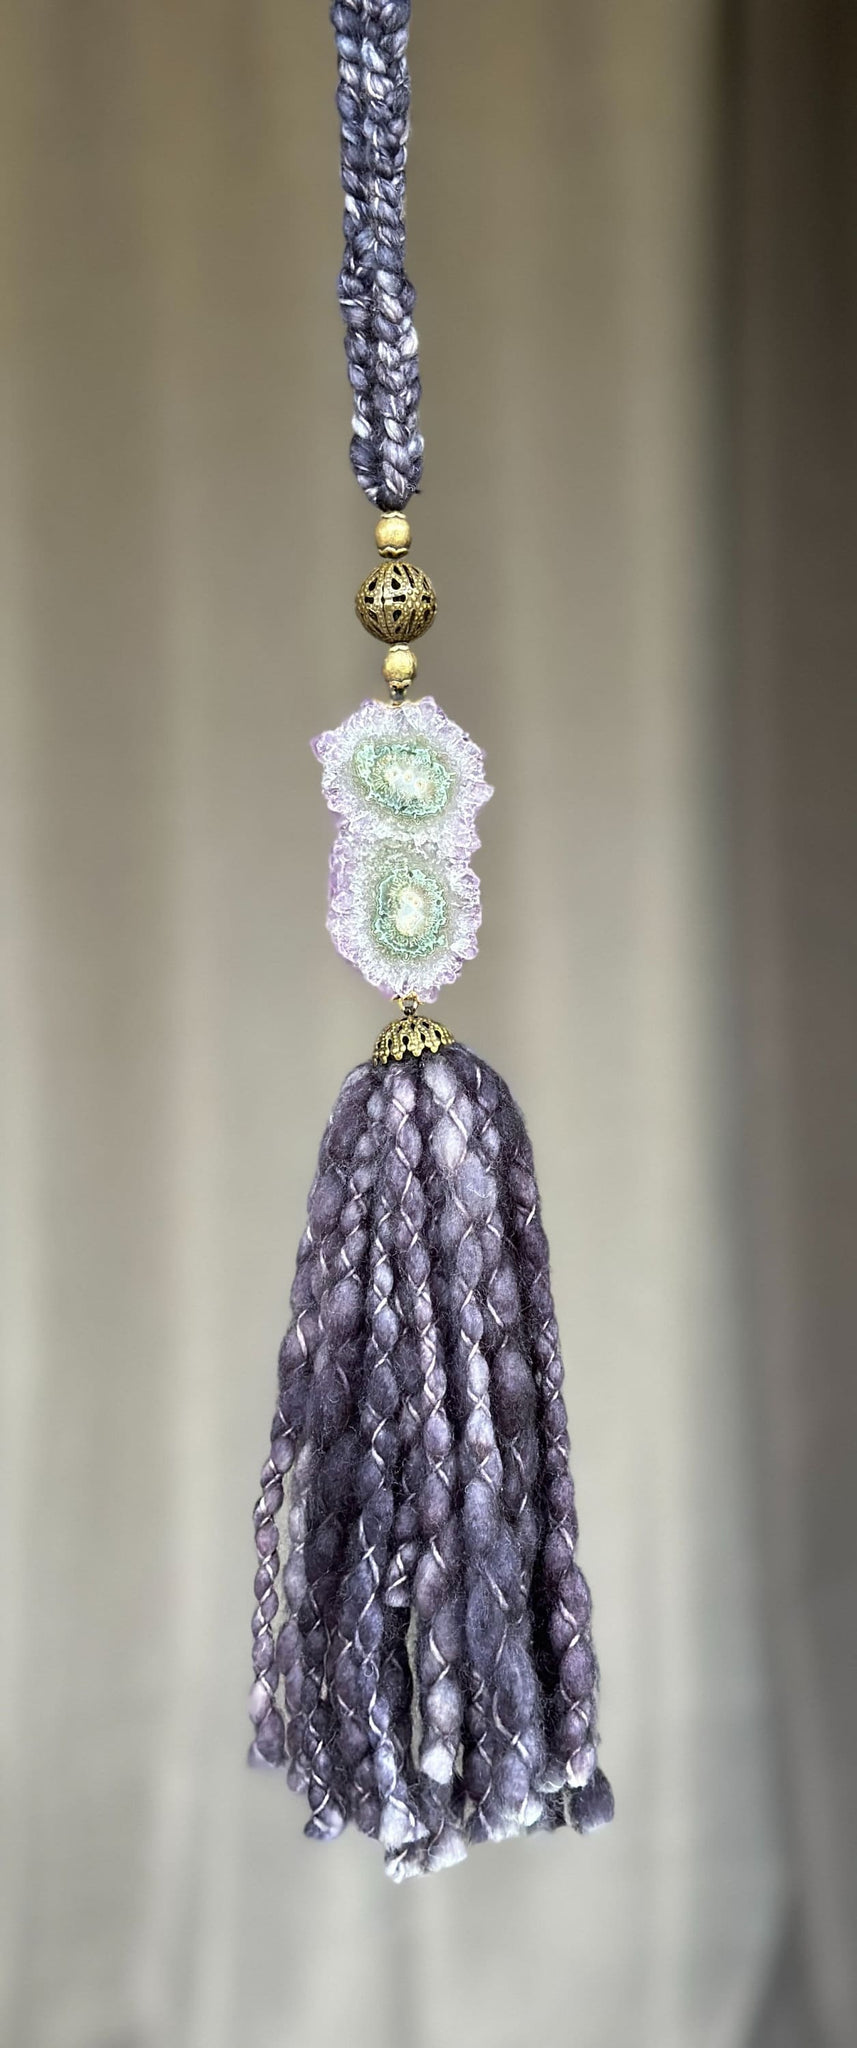 Wool Tassels with Amethyst Crystal Stalactite for Boho Decoration, Wall Hanging Tassels, Natural Merino Wool and Crystals Garland